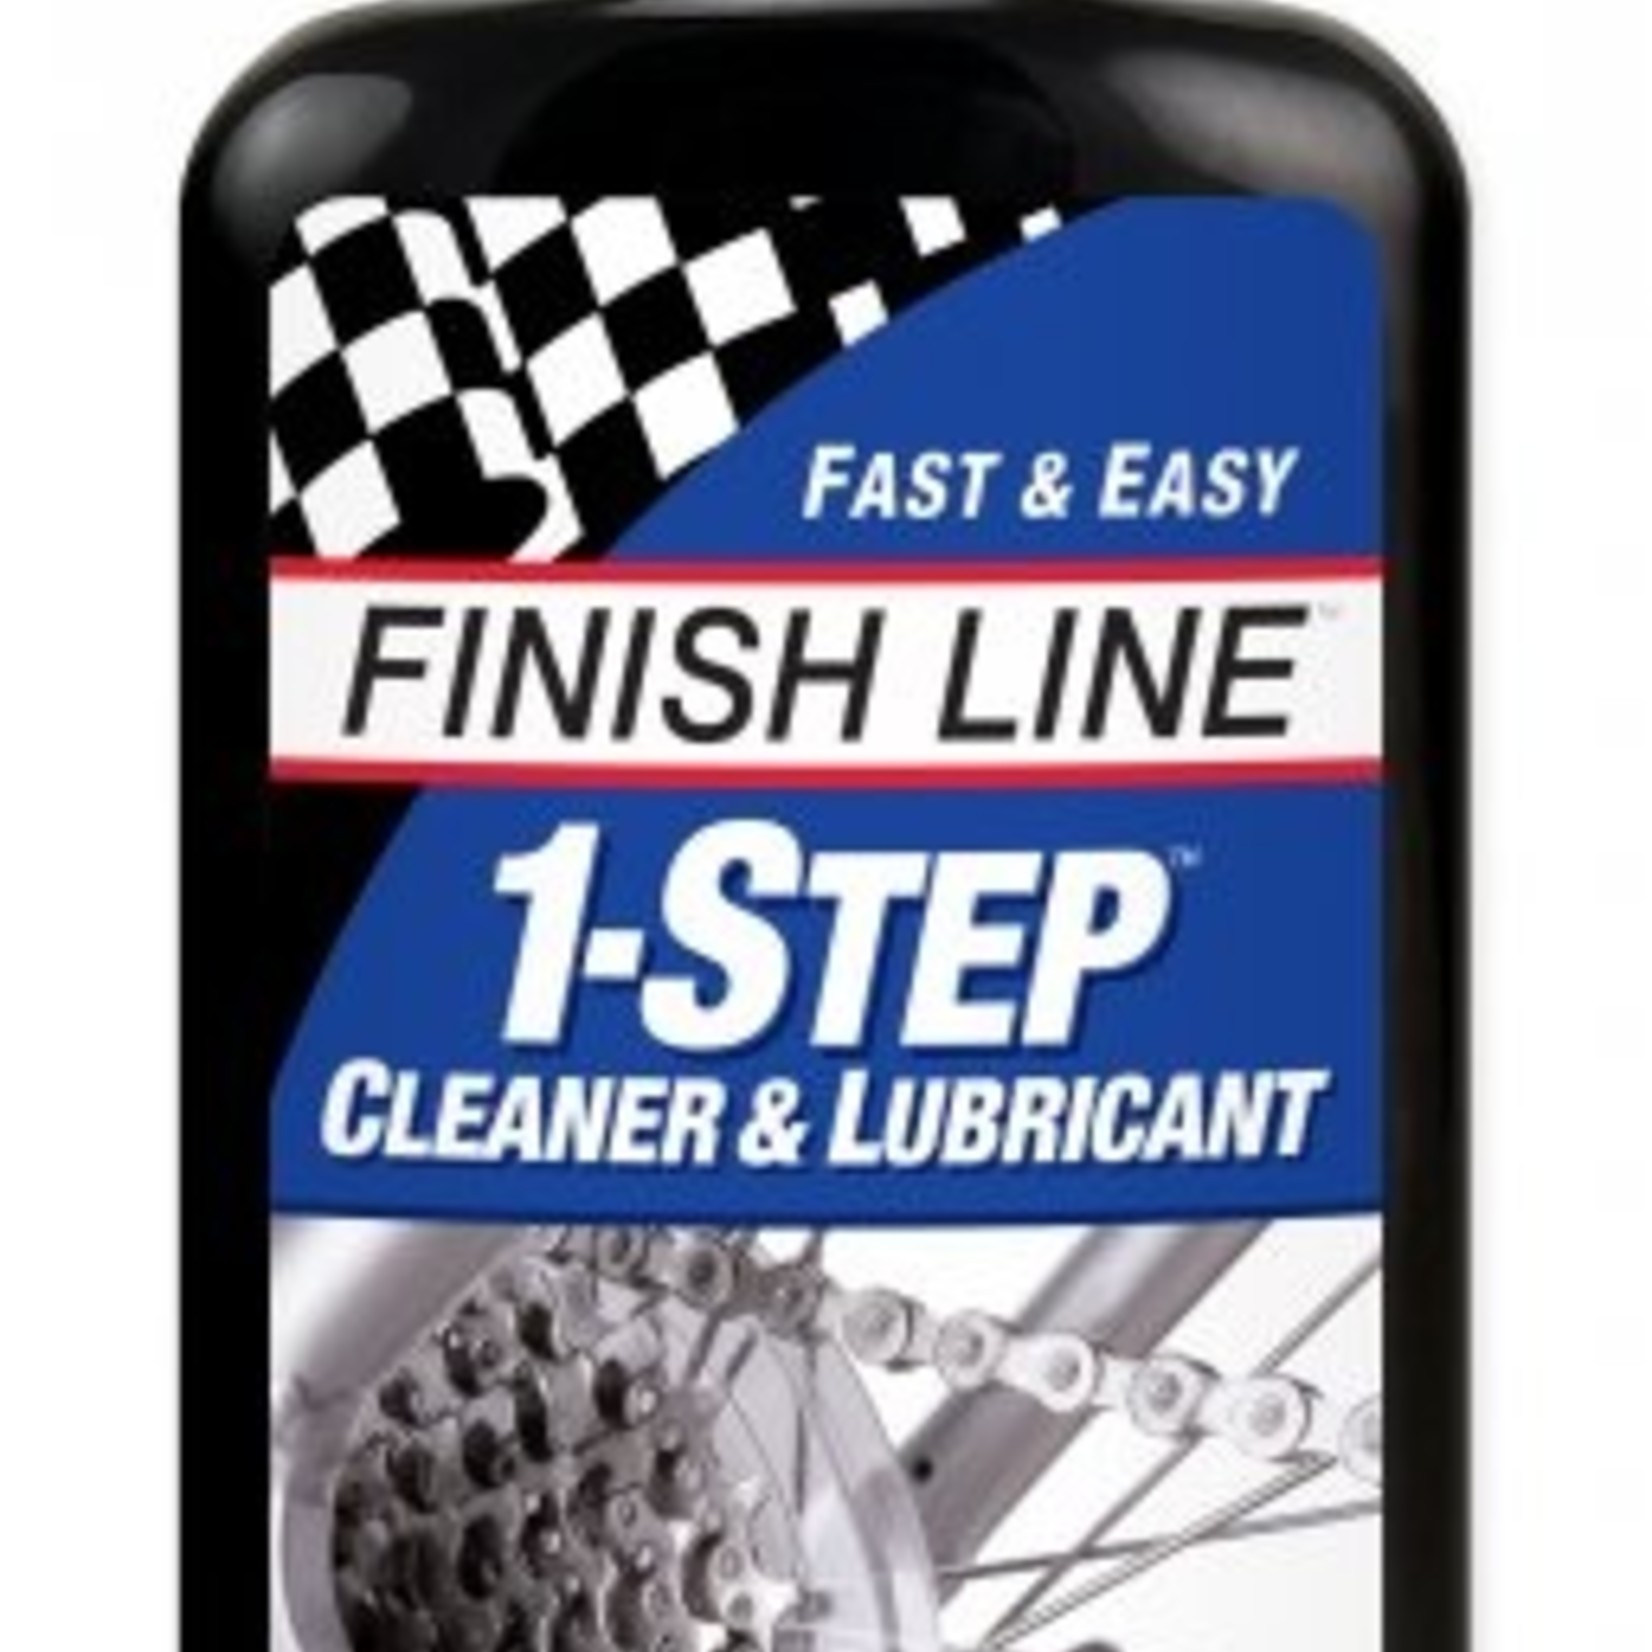 Finish Line 1-Step Cleaner & Lubricant - 4oz